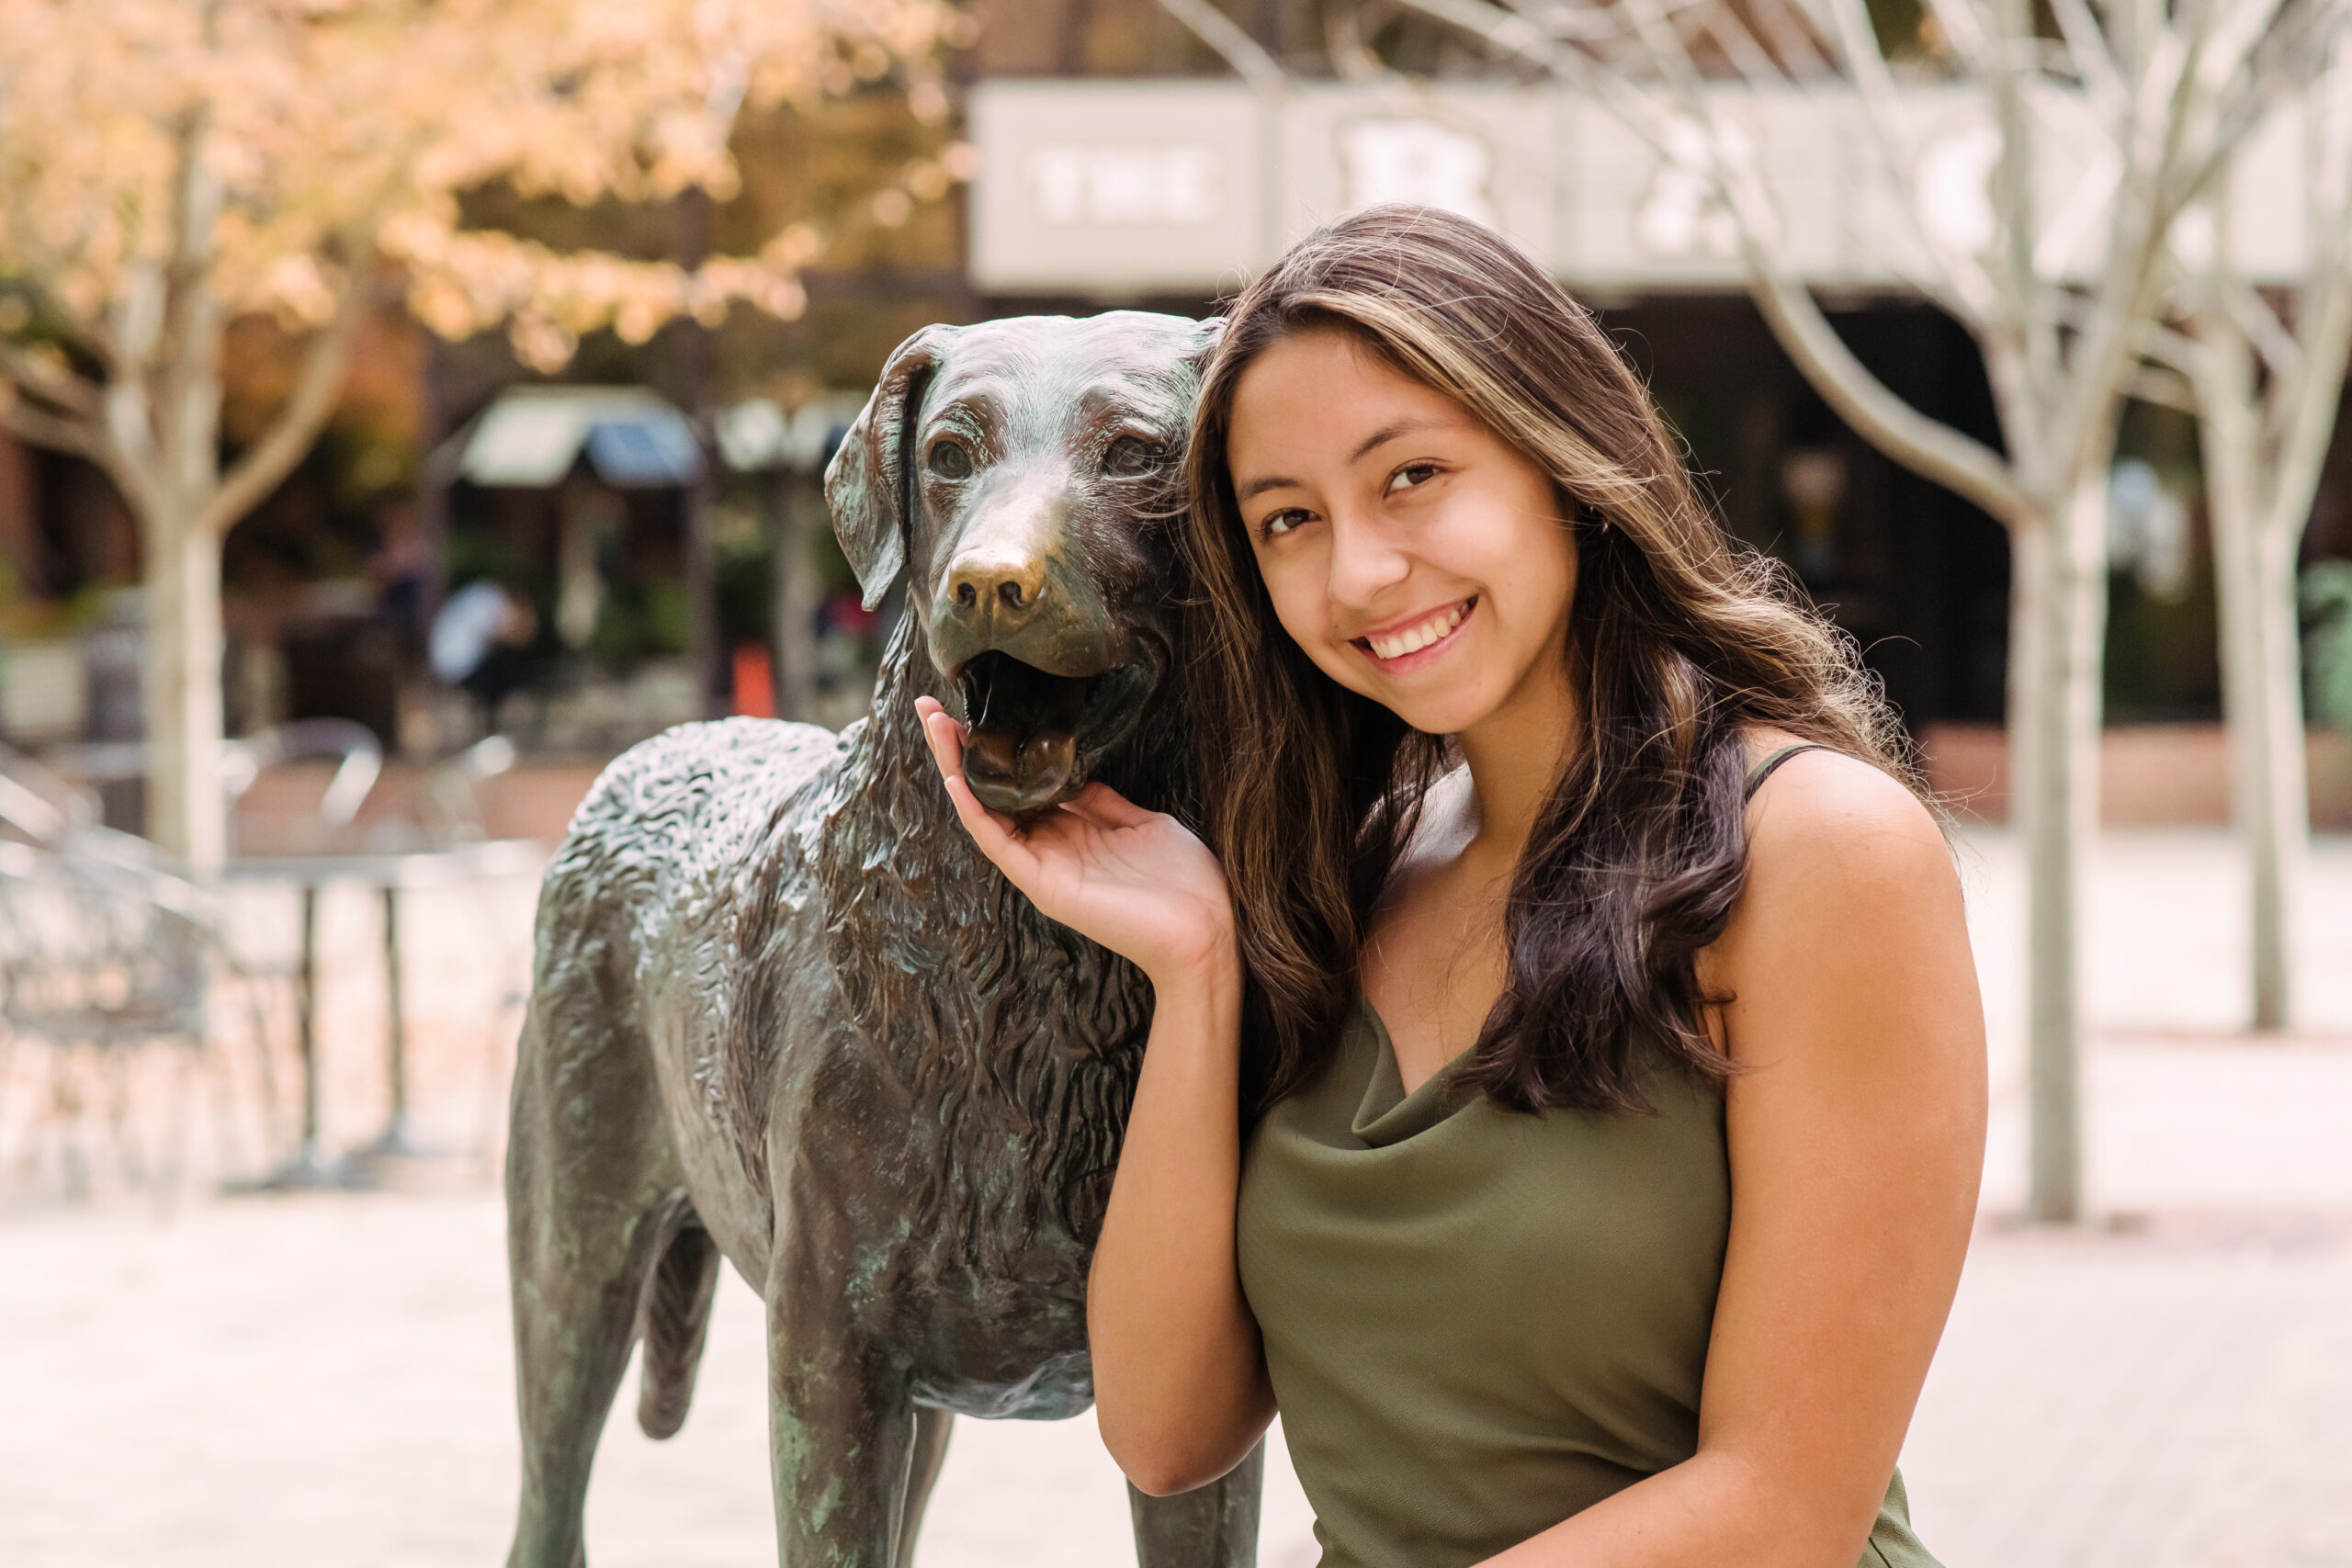 A young woman with dark hair smiles at the camera, posing with a statue of a dog